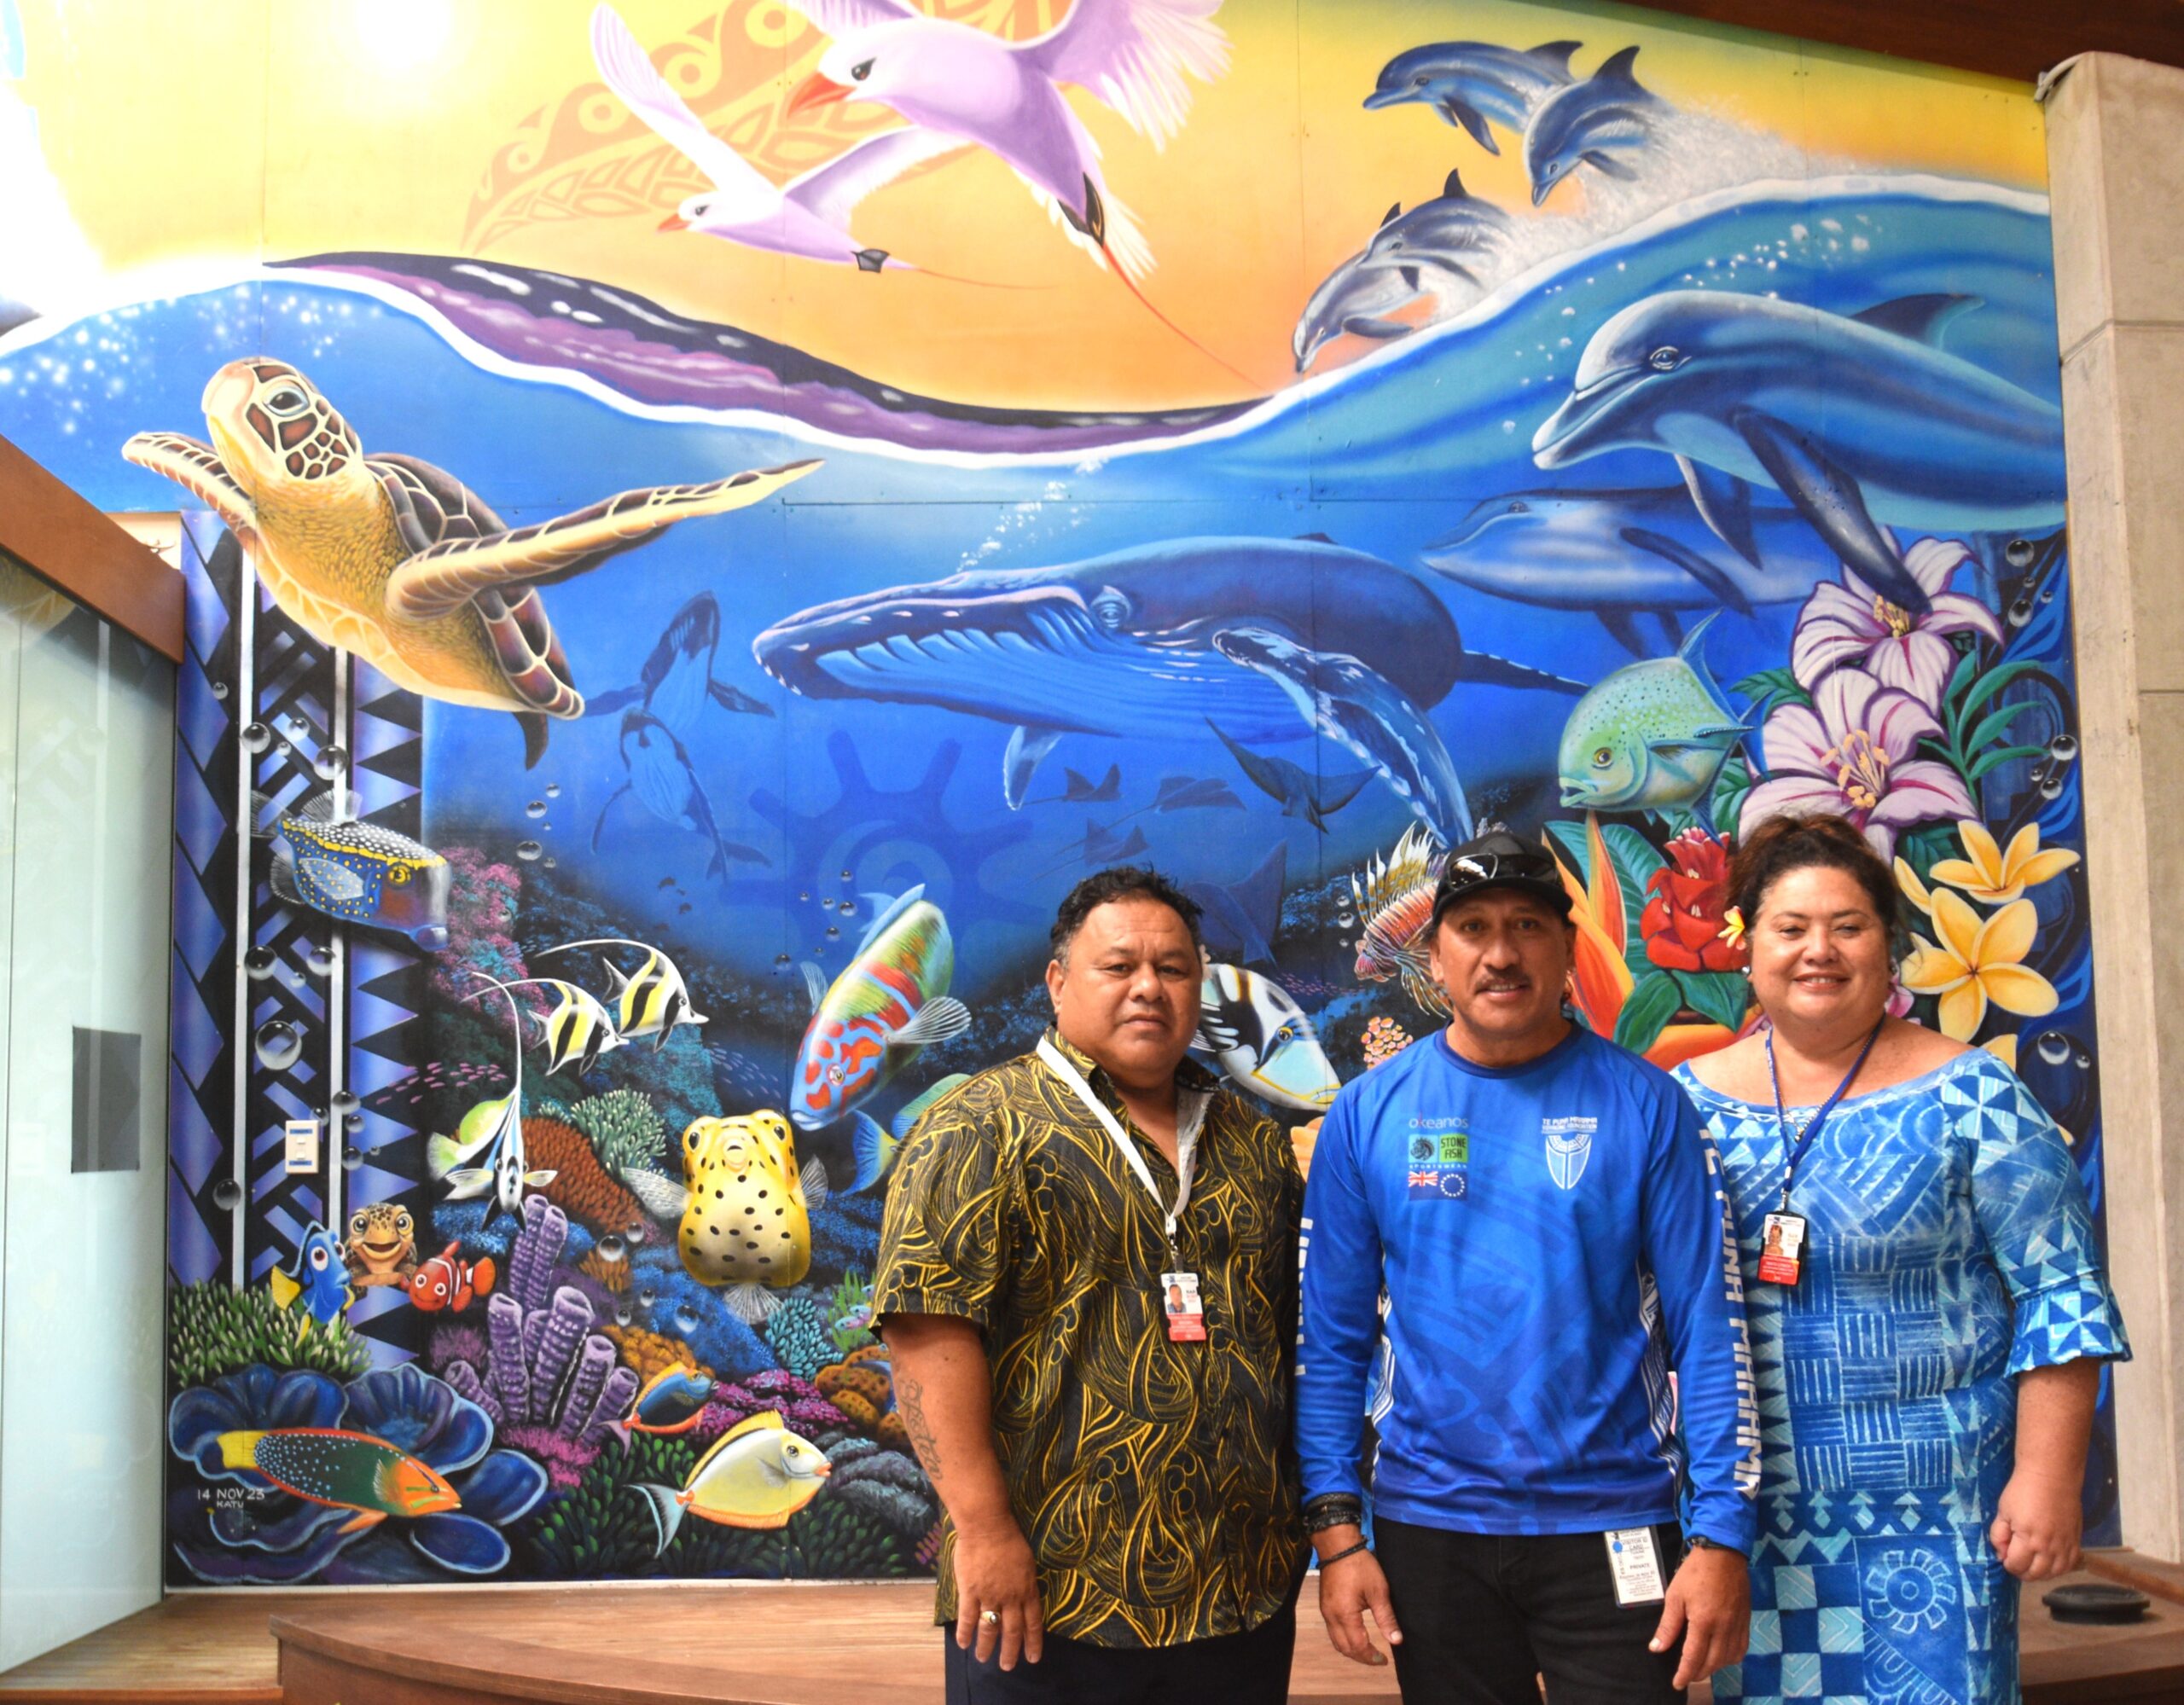 Colourful mural bids farewell to Cook Islands departures